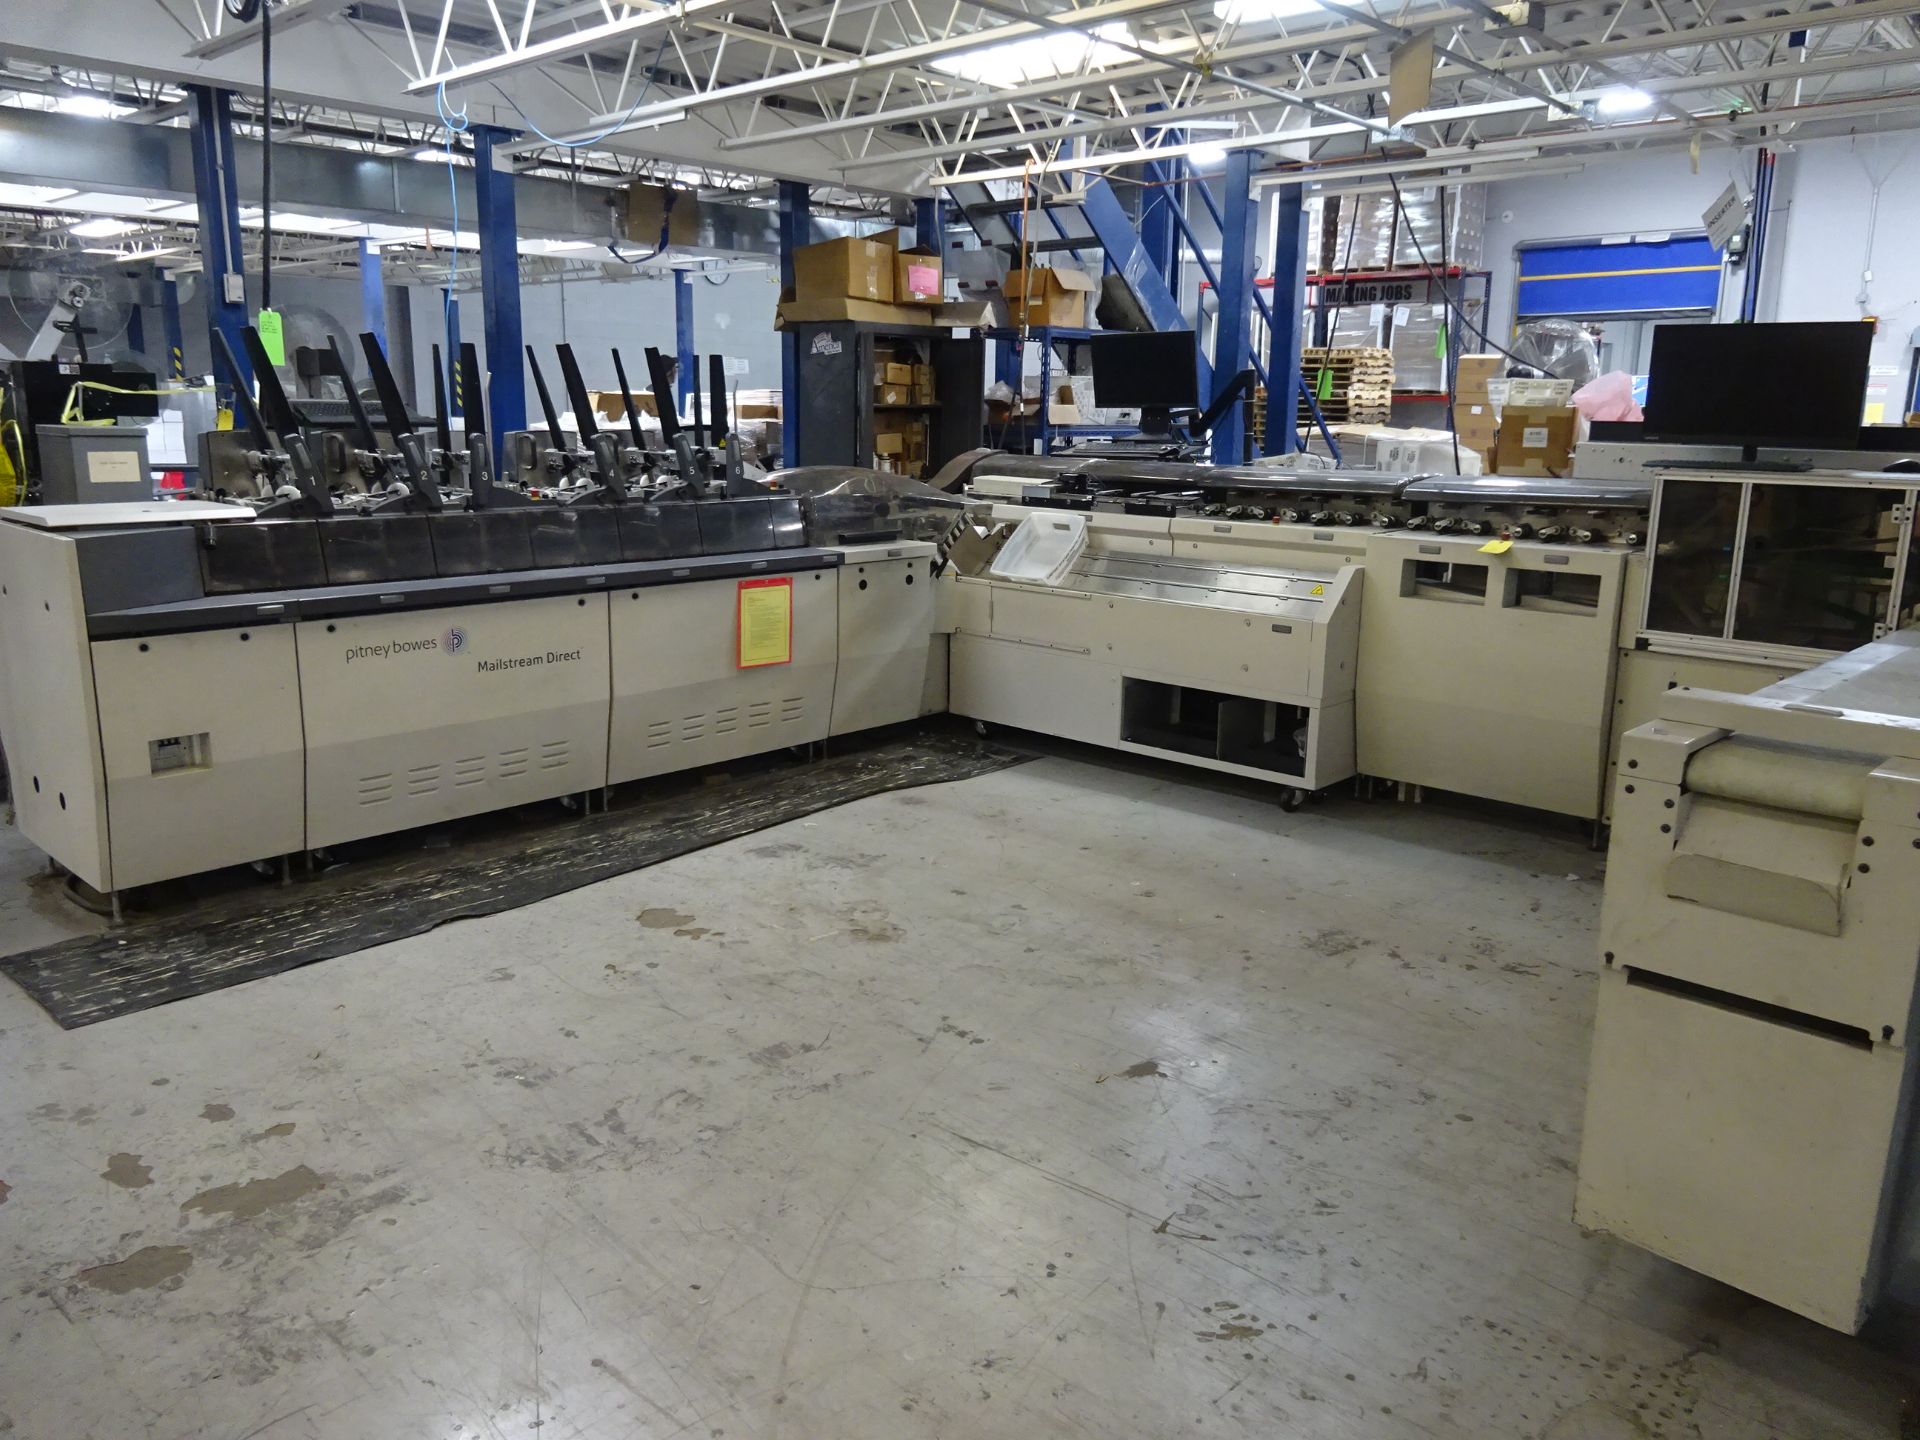 Pitney Bowes Mailstream Direct 6 Station Envelope Inserter With (2) Flat Pile Vacuum Feeders, (4)